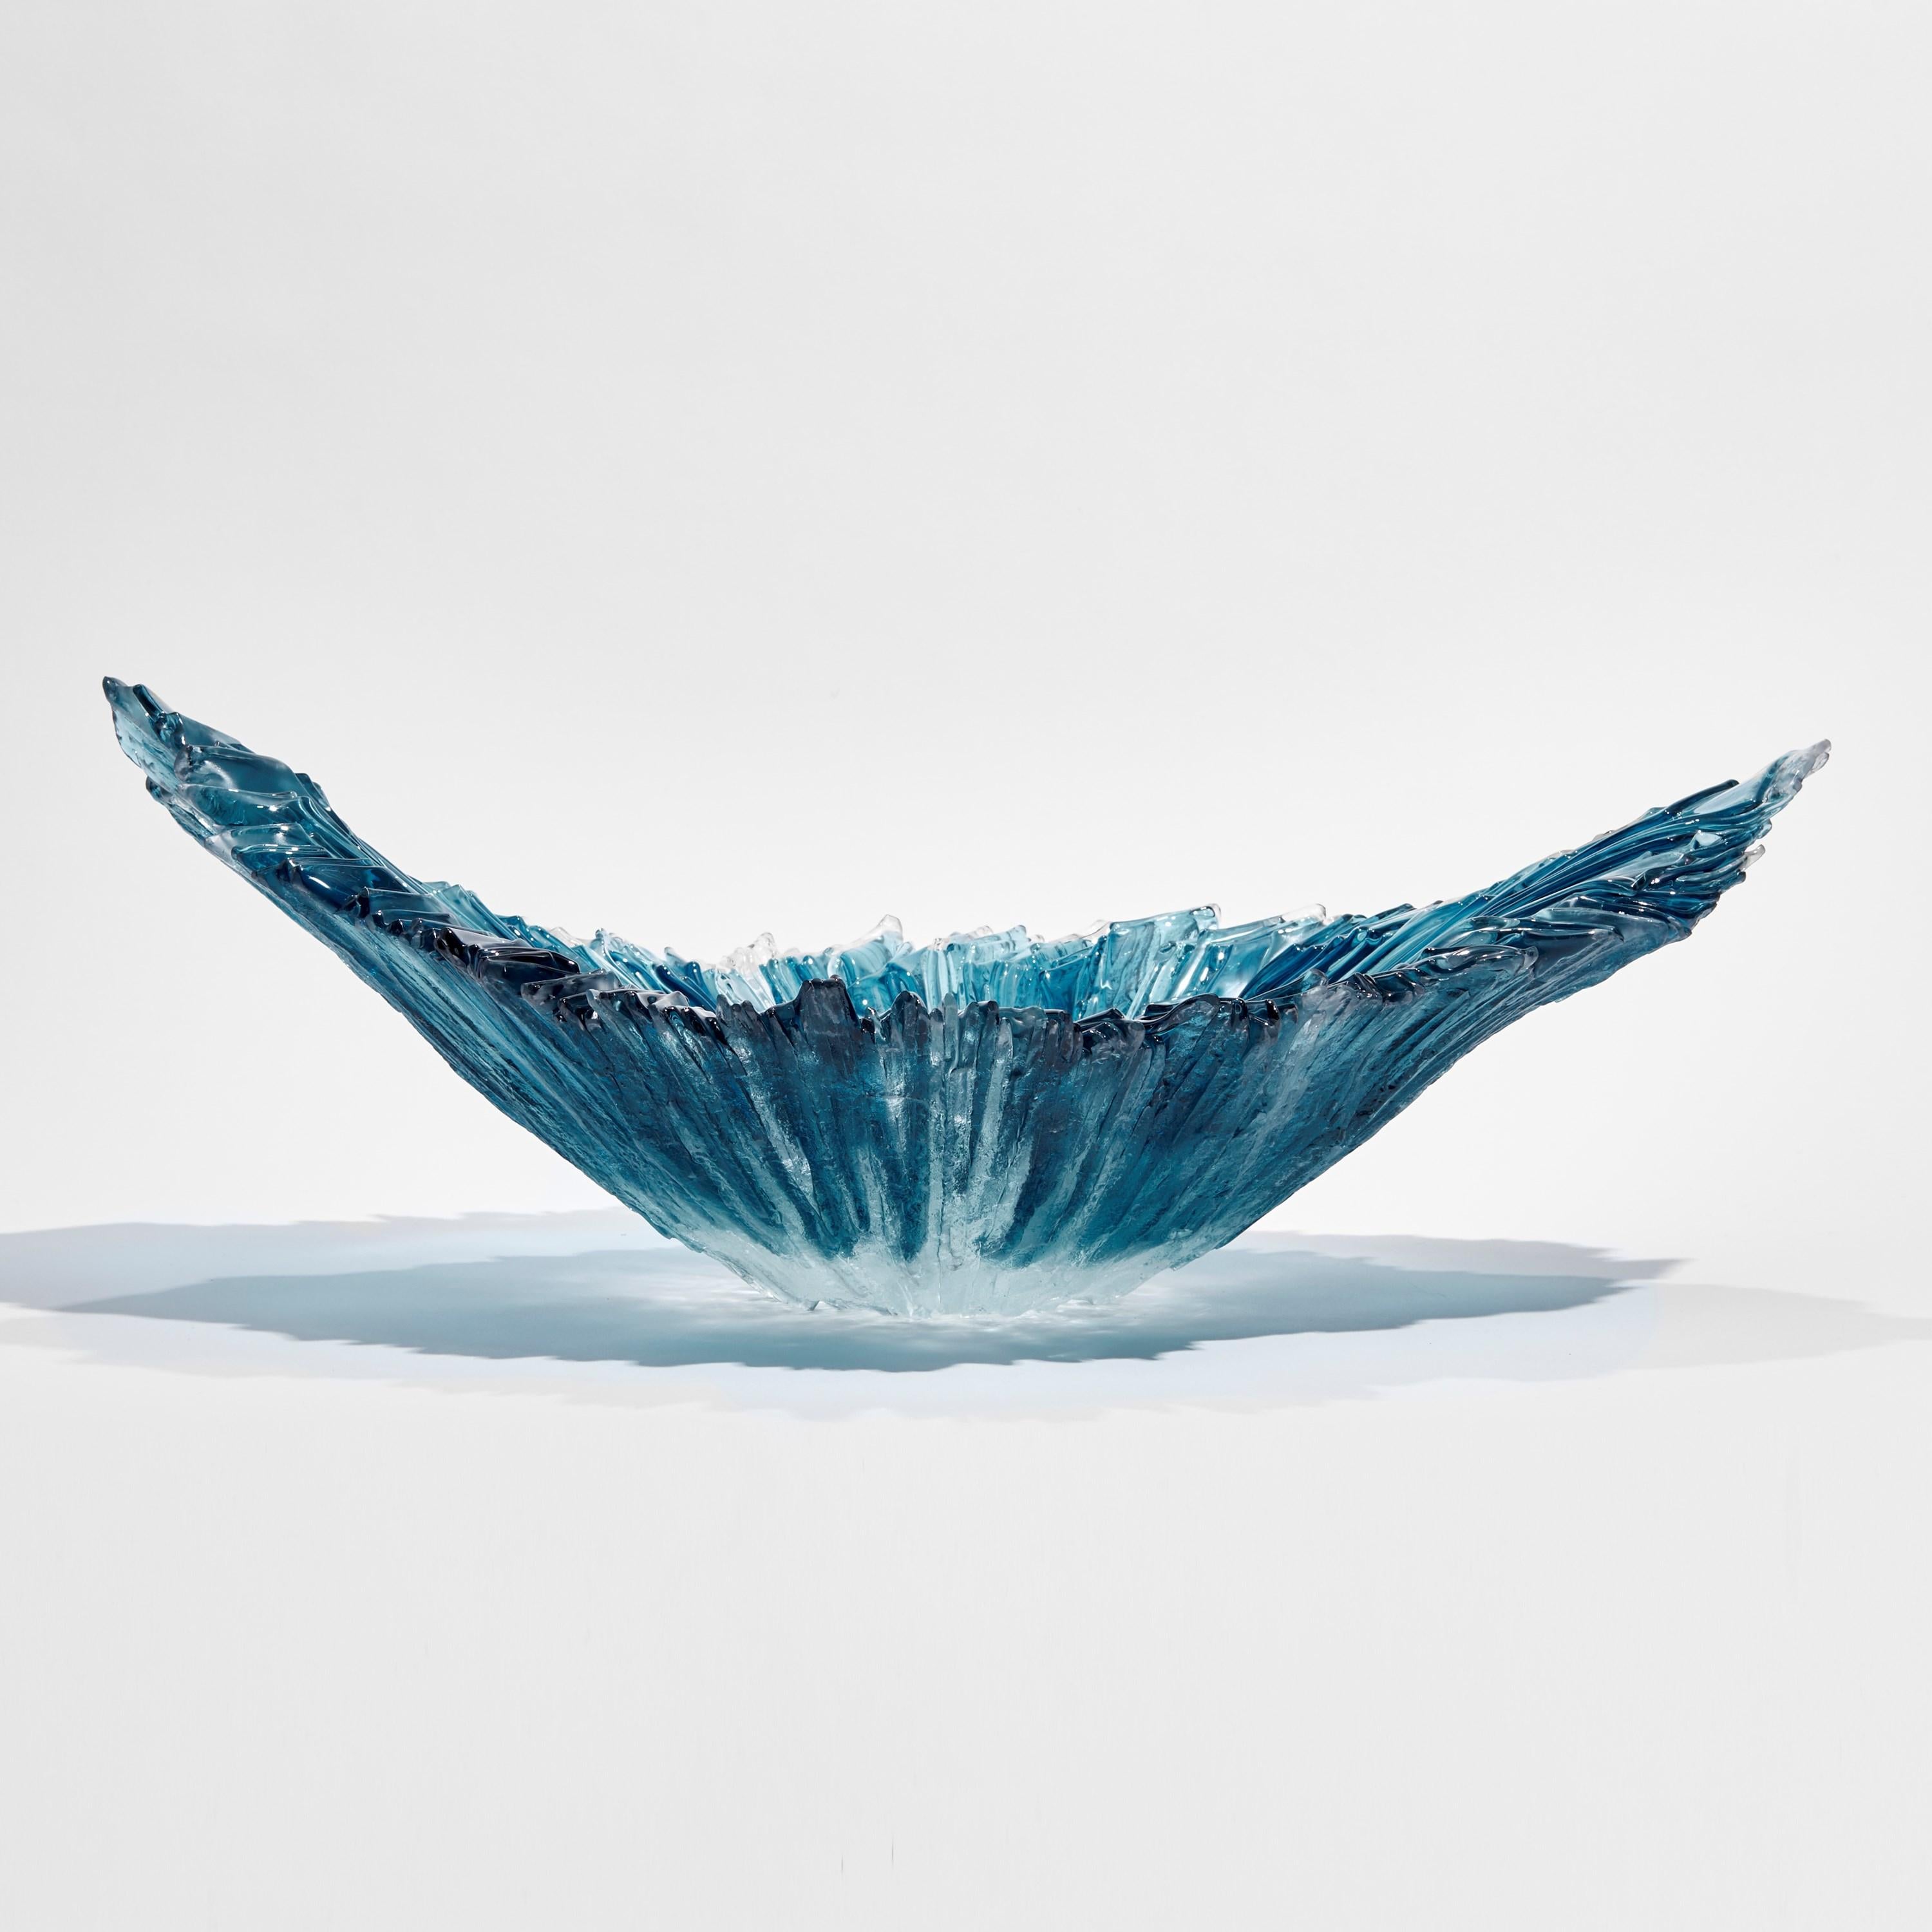 Hand-Crafted Oval Coral Bowl in Aqua, a Blue Sculptural Glass Centrepiece by Wayne Charmer